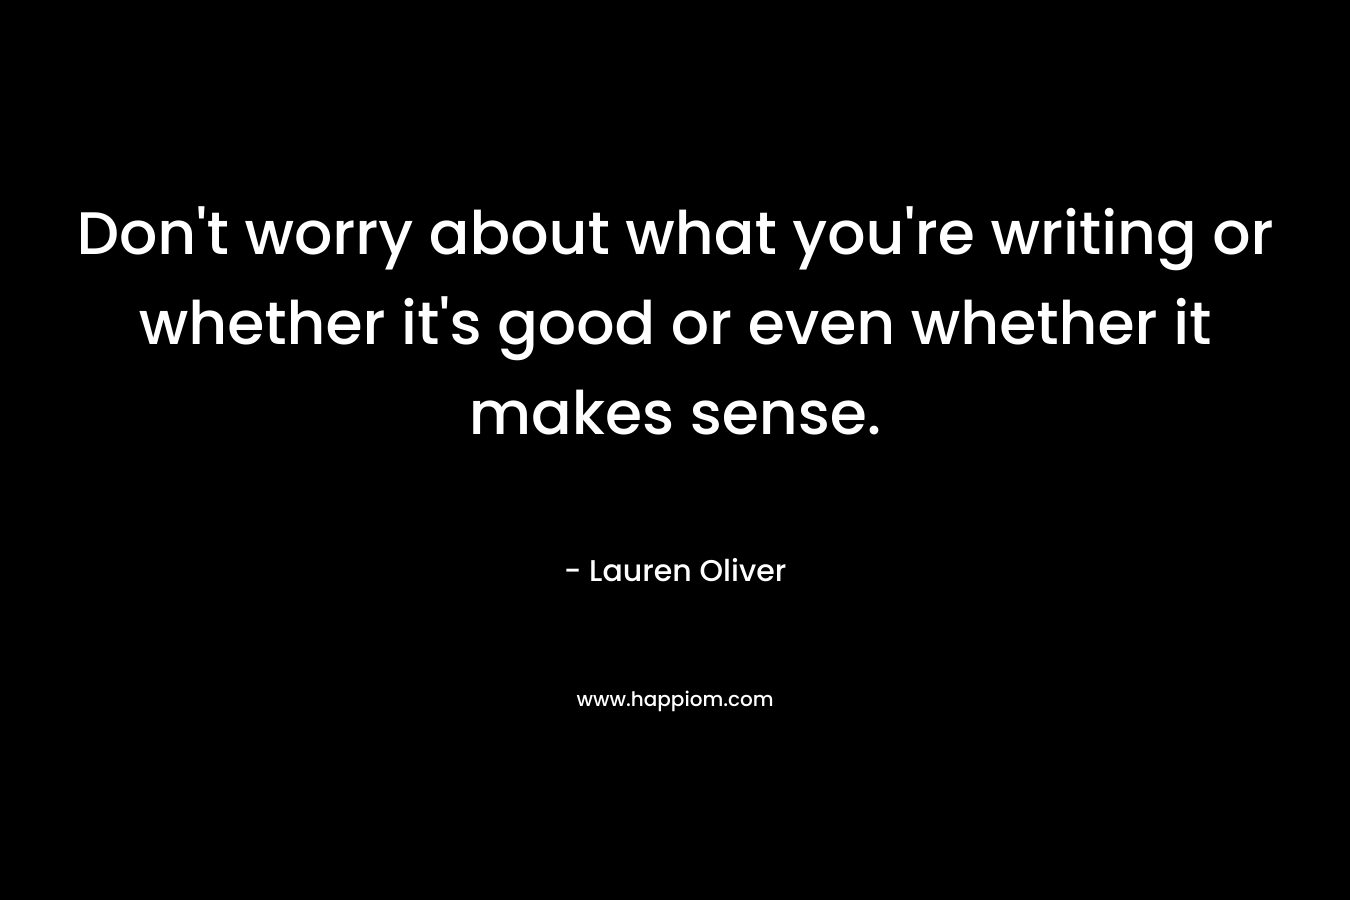 Don’t worry about what you’re writing or whether it’s good or even whether it makes sense. – Lauren Oliver